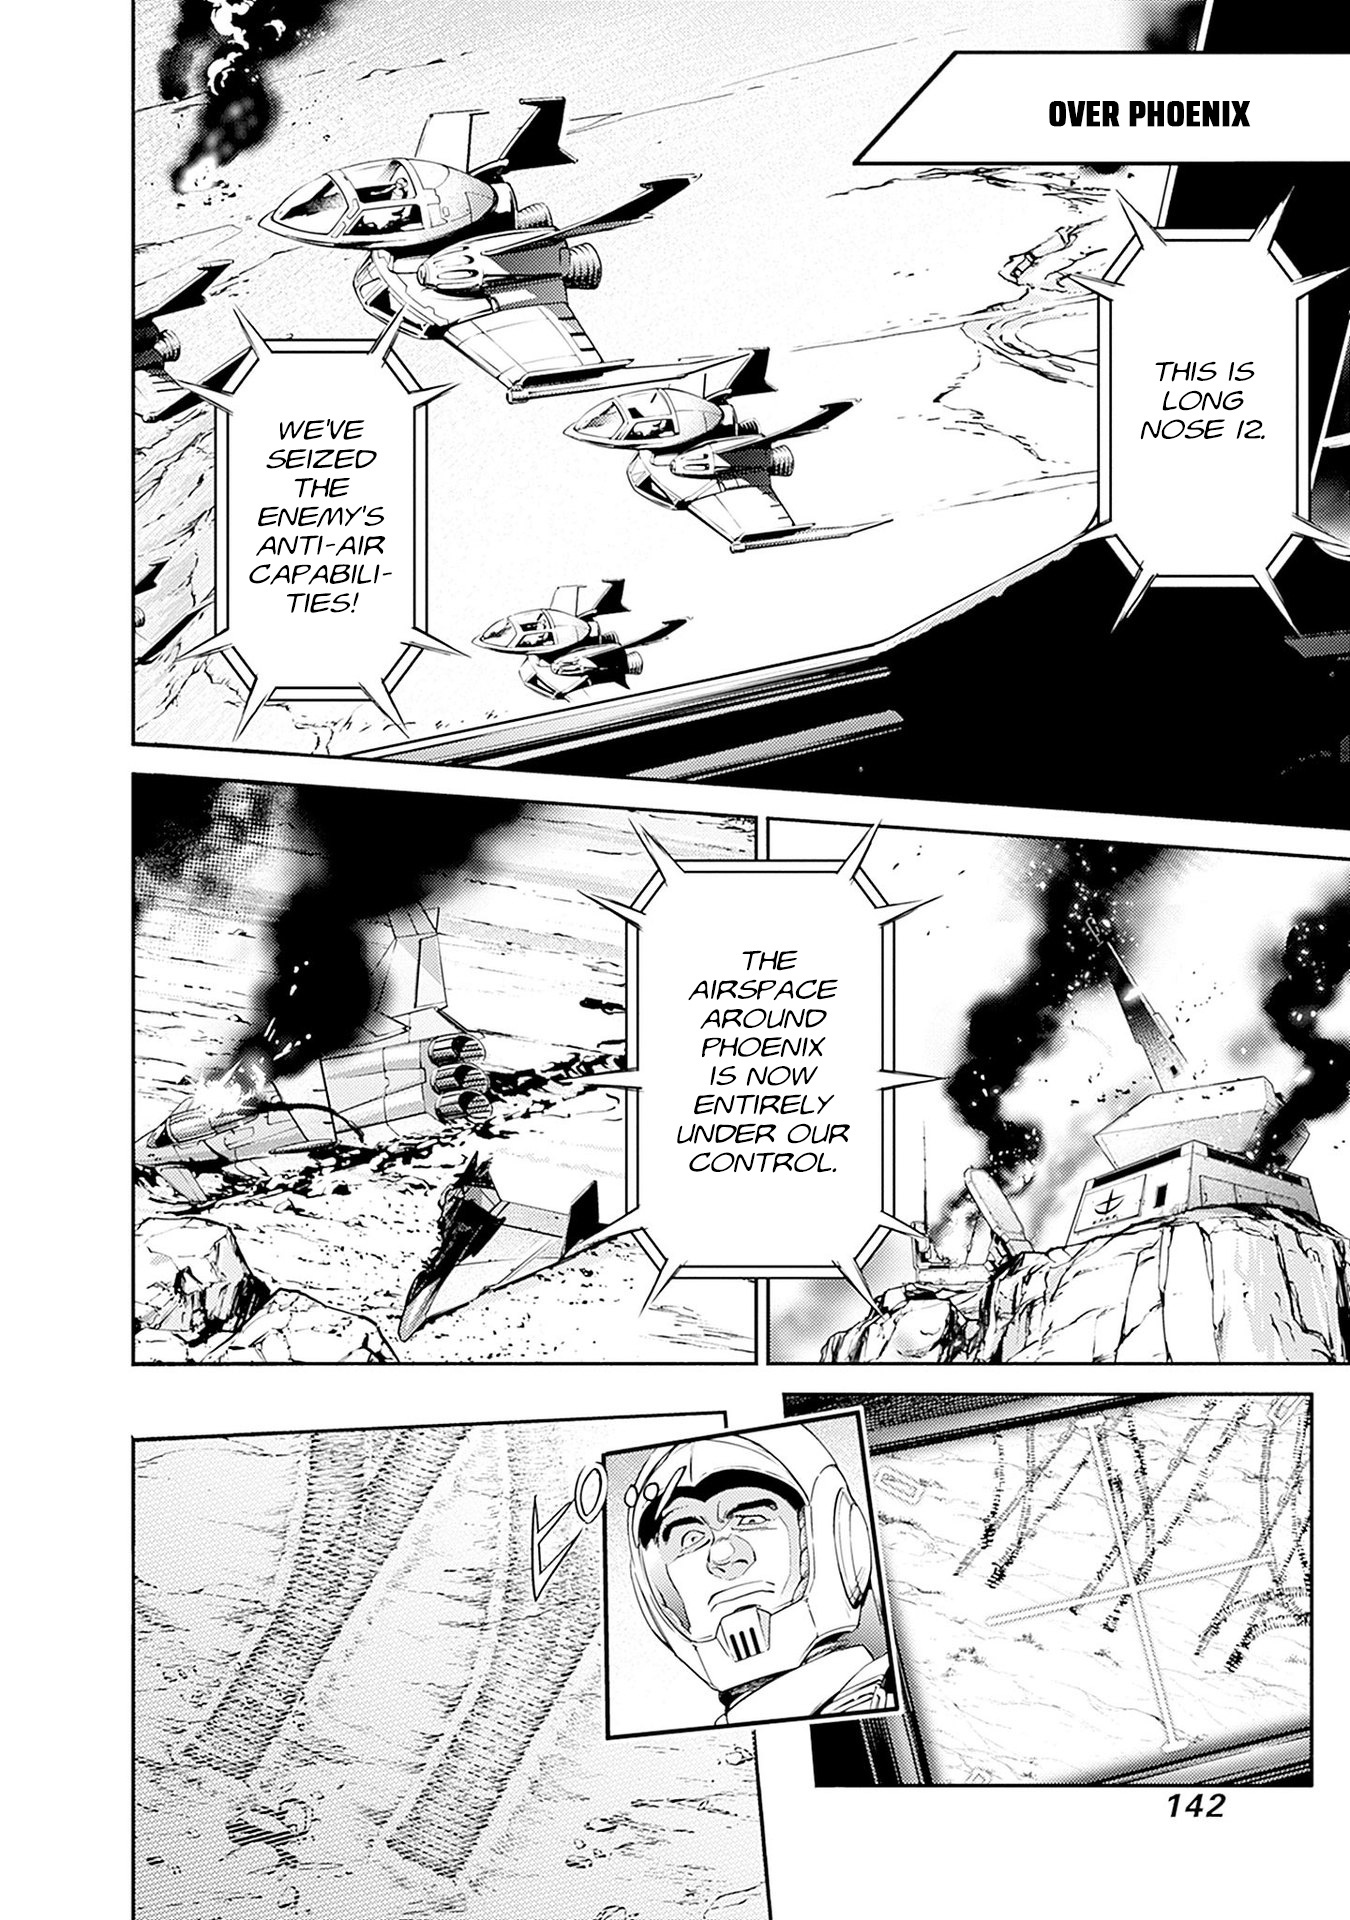 Mobile Suit Gundam Rust Horizon Vol.2 Chapter 7: For The Sunrise Of Tomorrow - Picture 3